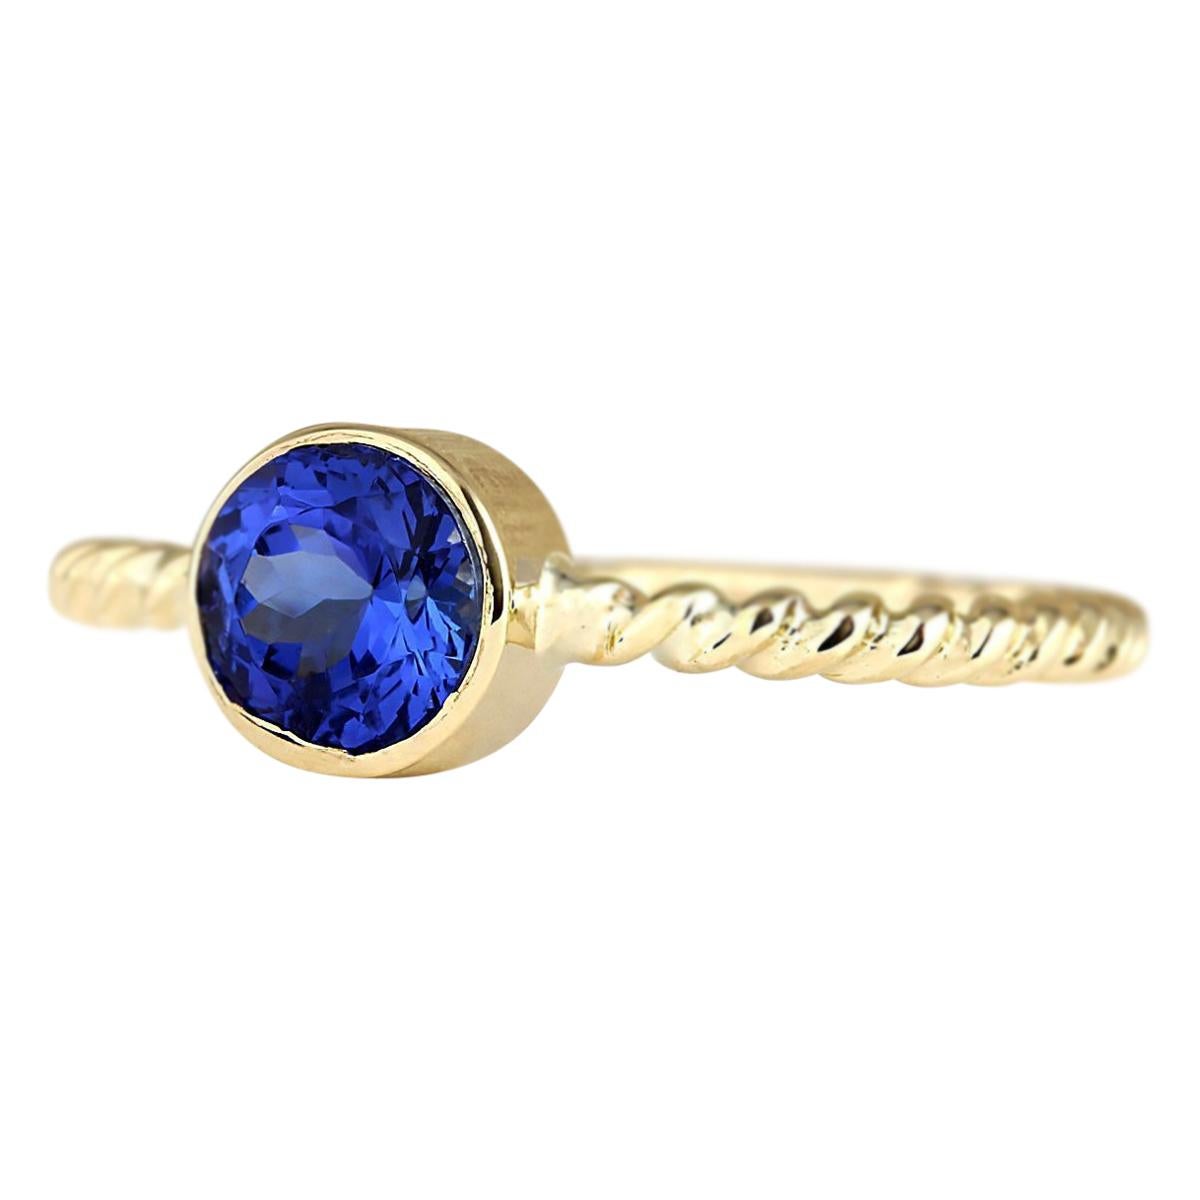 Stamped: 14K Yellow Gold
Total Ring Weight: 2.2 Grams
Total Natural Tanzanite Weight is 1.00 Carat
Color: Blue
Face Measures: 6.70x6.70 mm
Sku: [703230W]